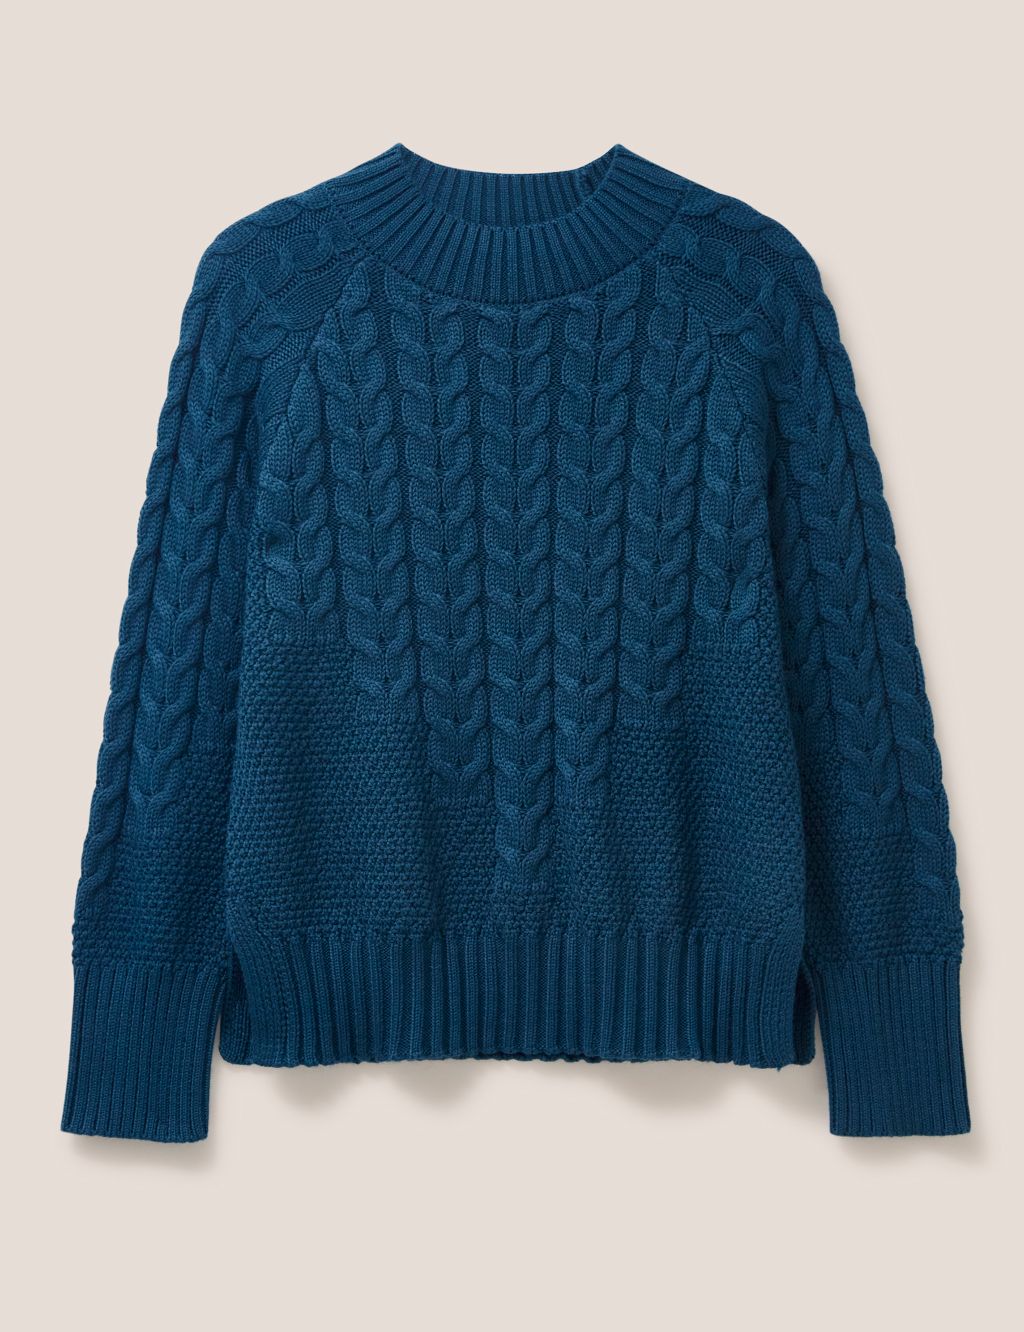 Wool Blend Cable Knit Crew Neck Jumper image 2